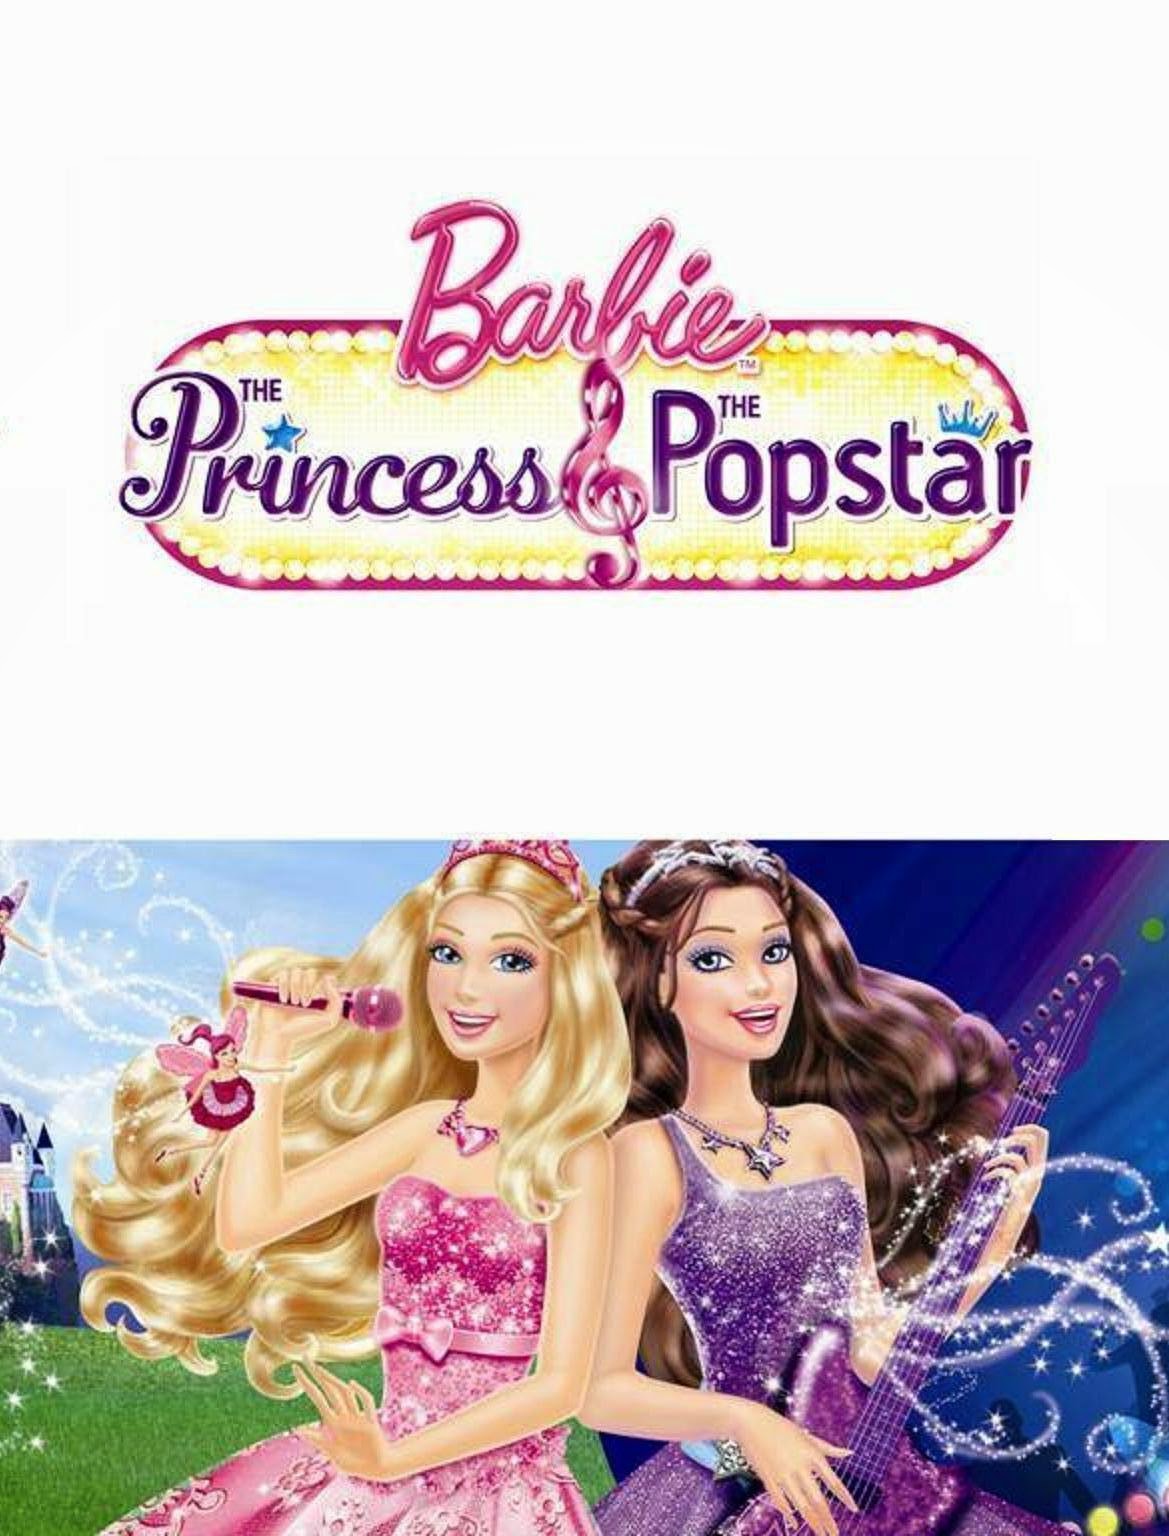 Barbie: The Princess and the Popstar (2012) Full Movie HD